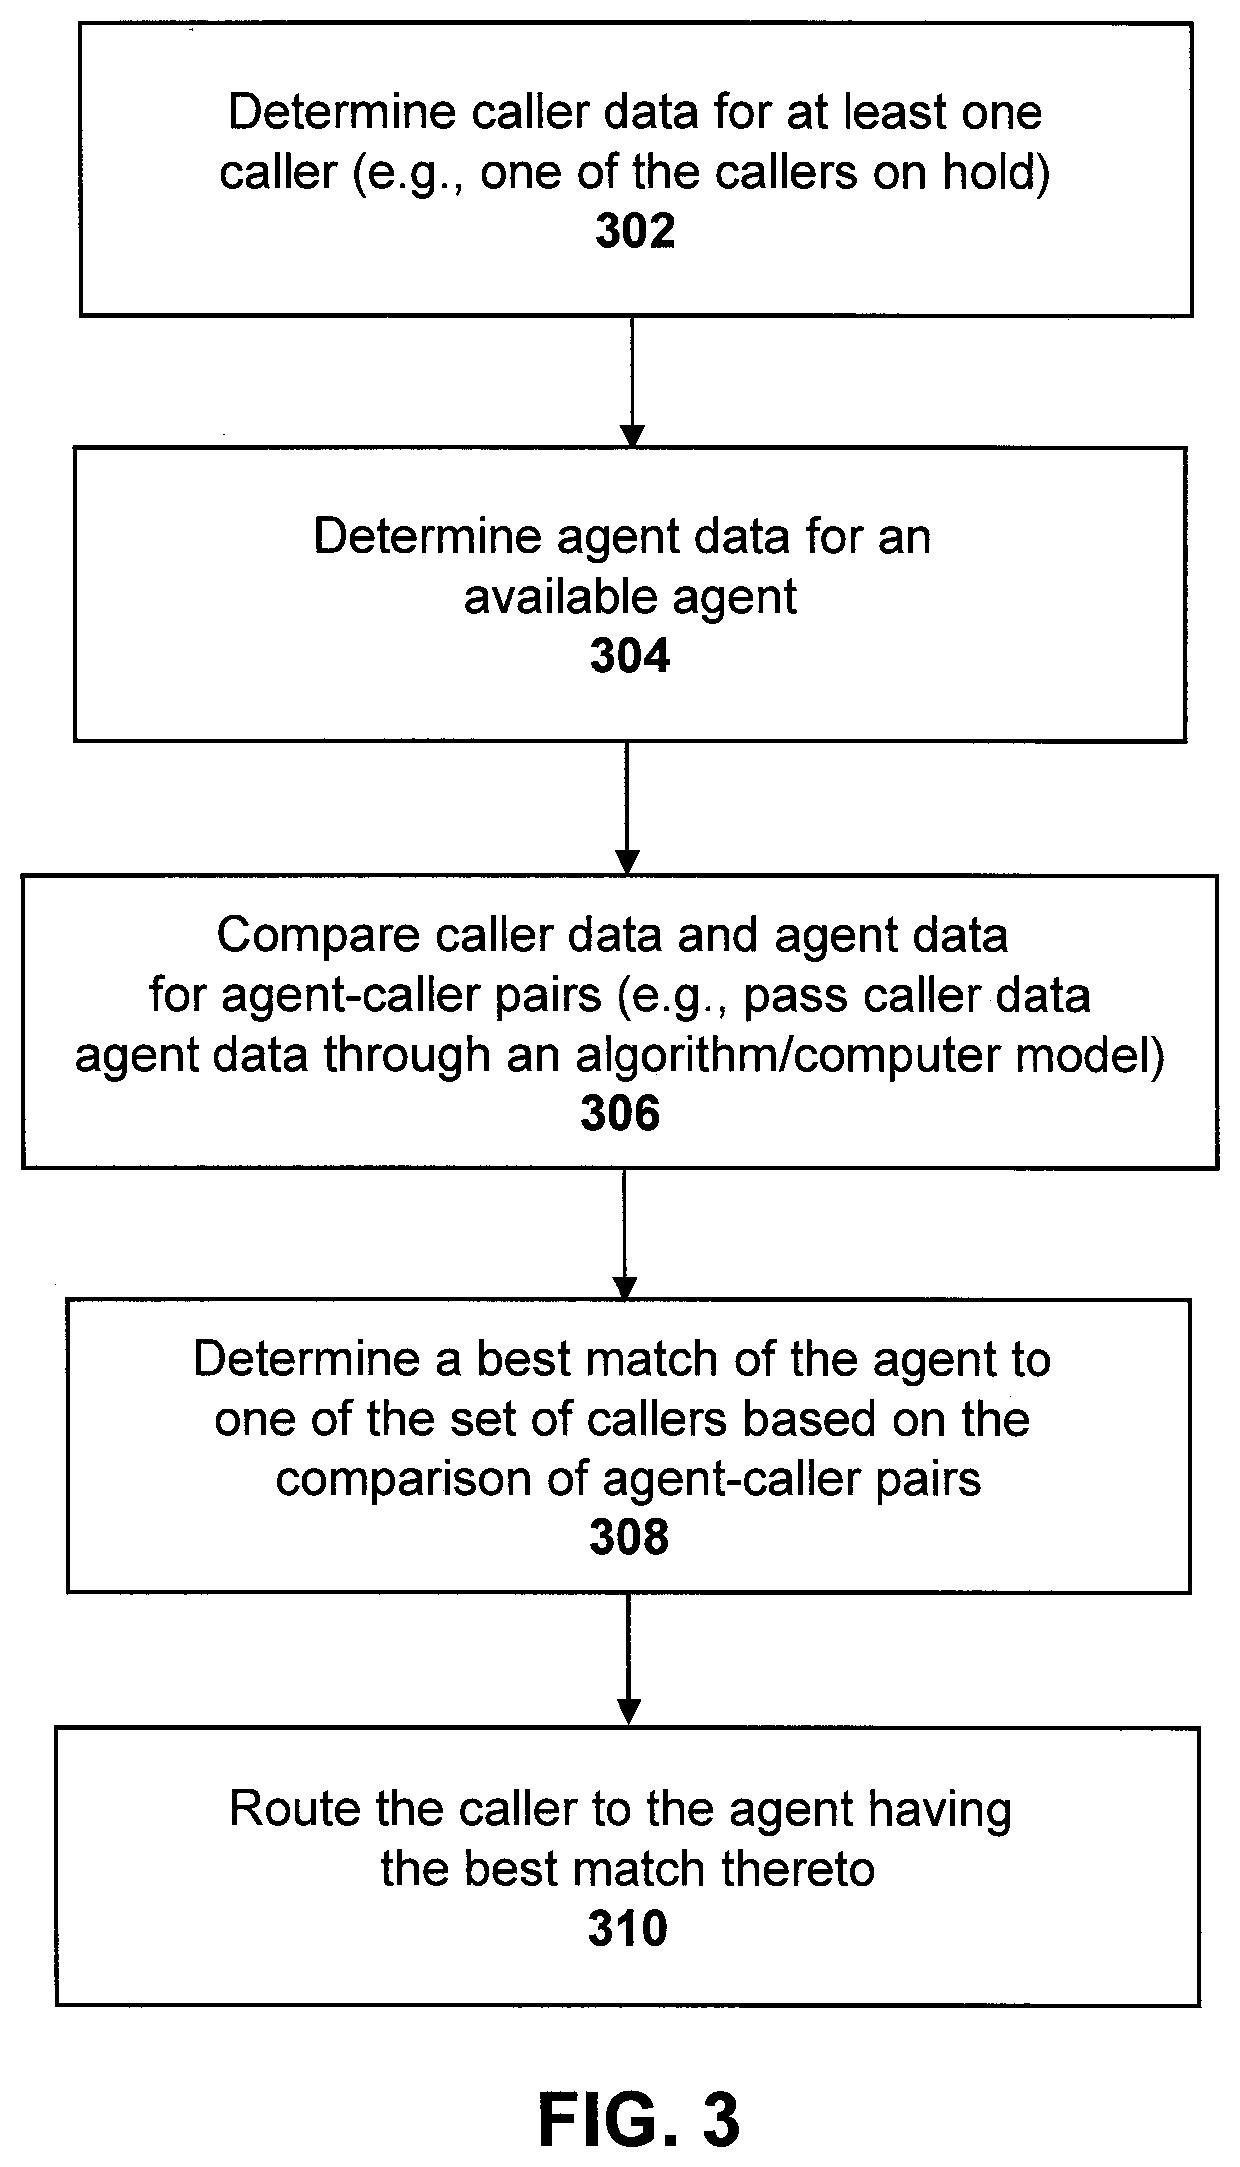 Pooling callers for matching to agents based on pattern matching algorithms